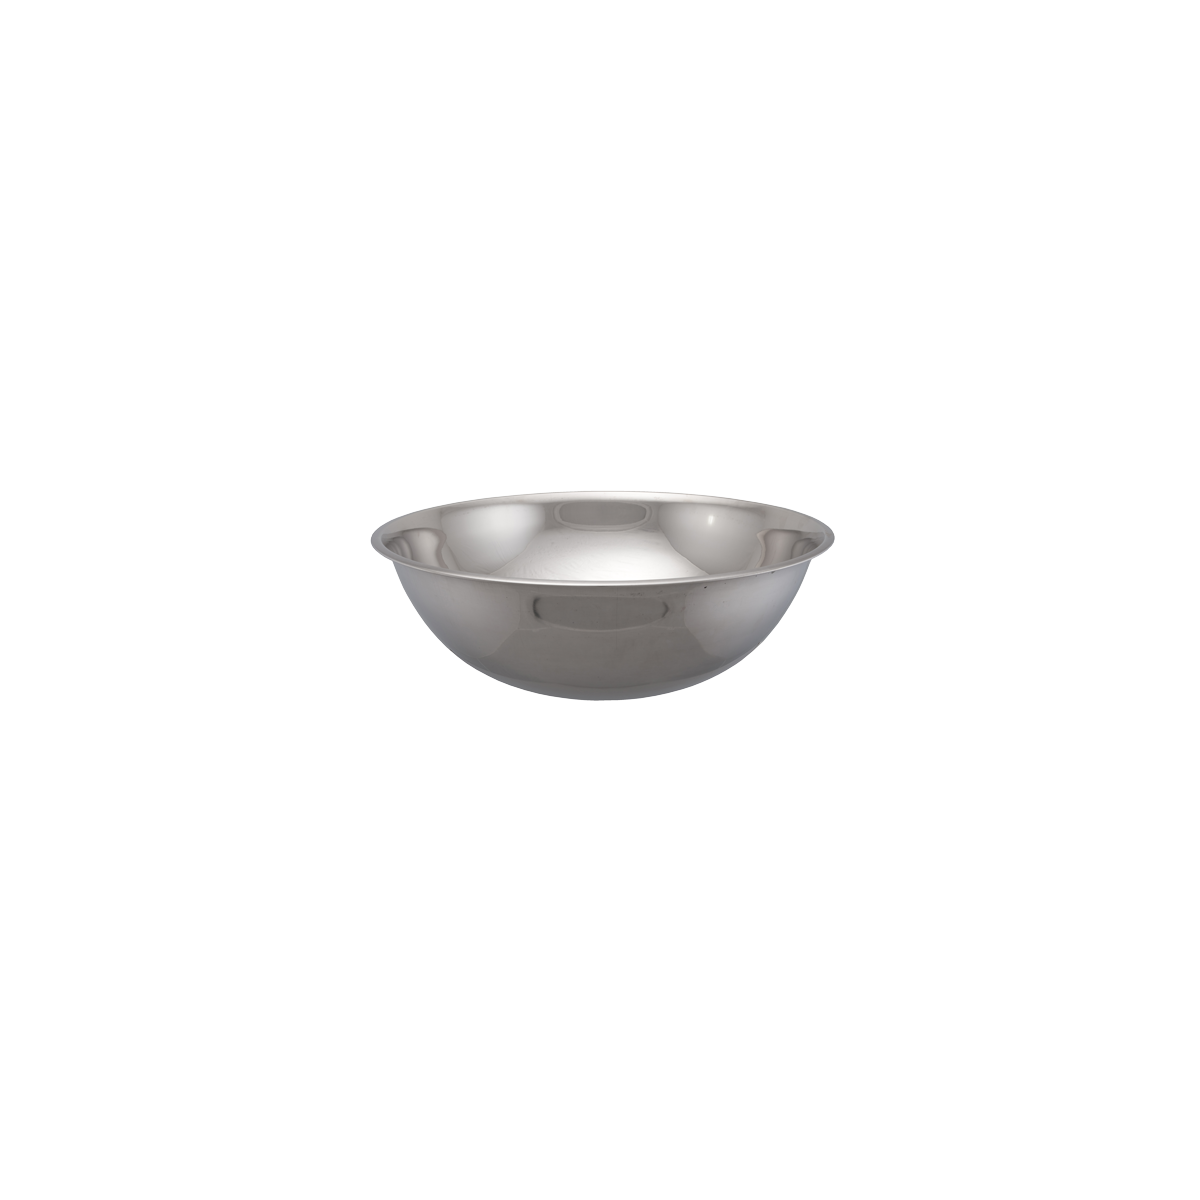 Libertyware 13 Quart Stainless Steel Mixing Bowl